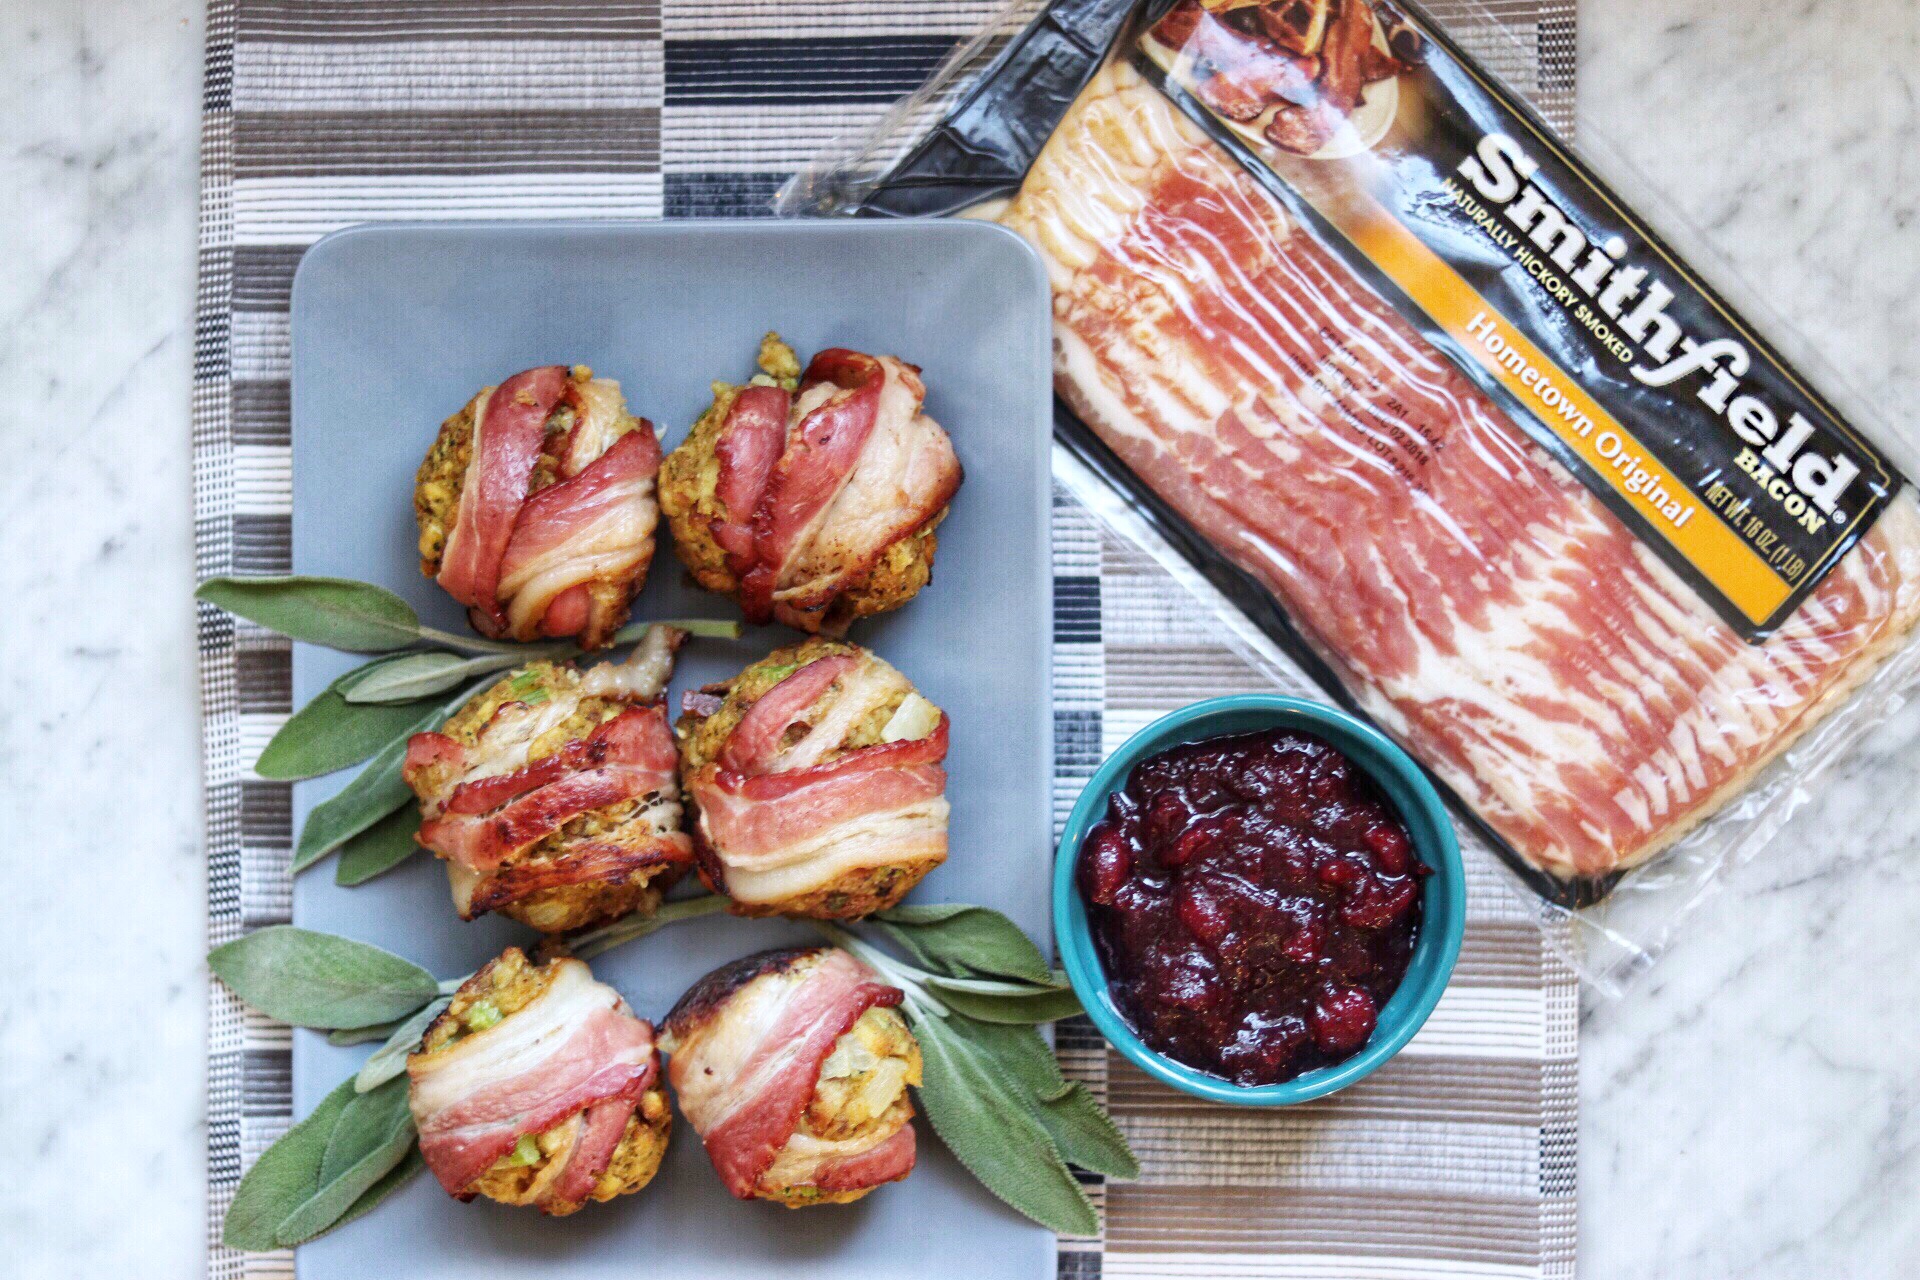 Bacon-Wrapped Stuffing Balls (easy recipe for stuffing balls wrapped in bacon)